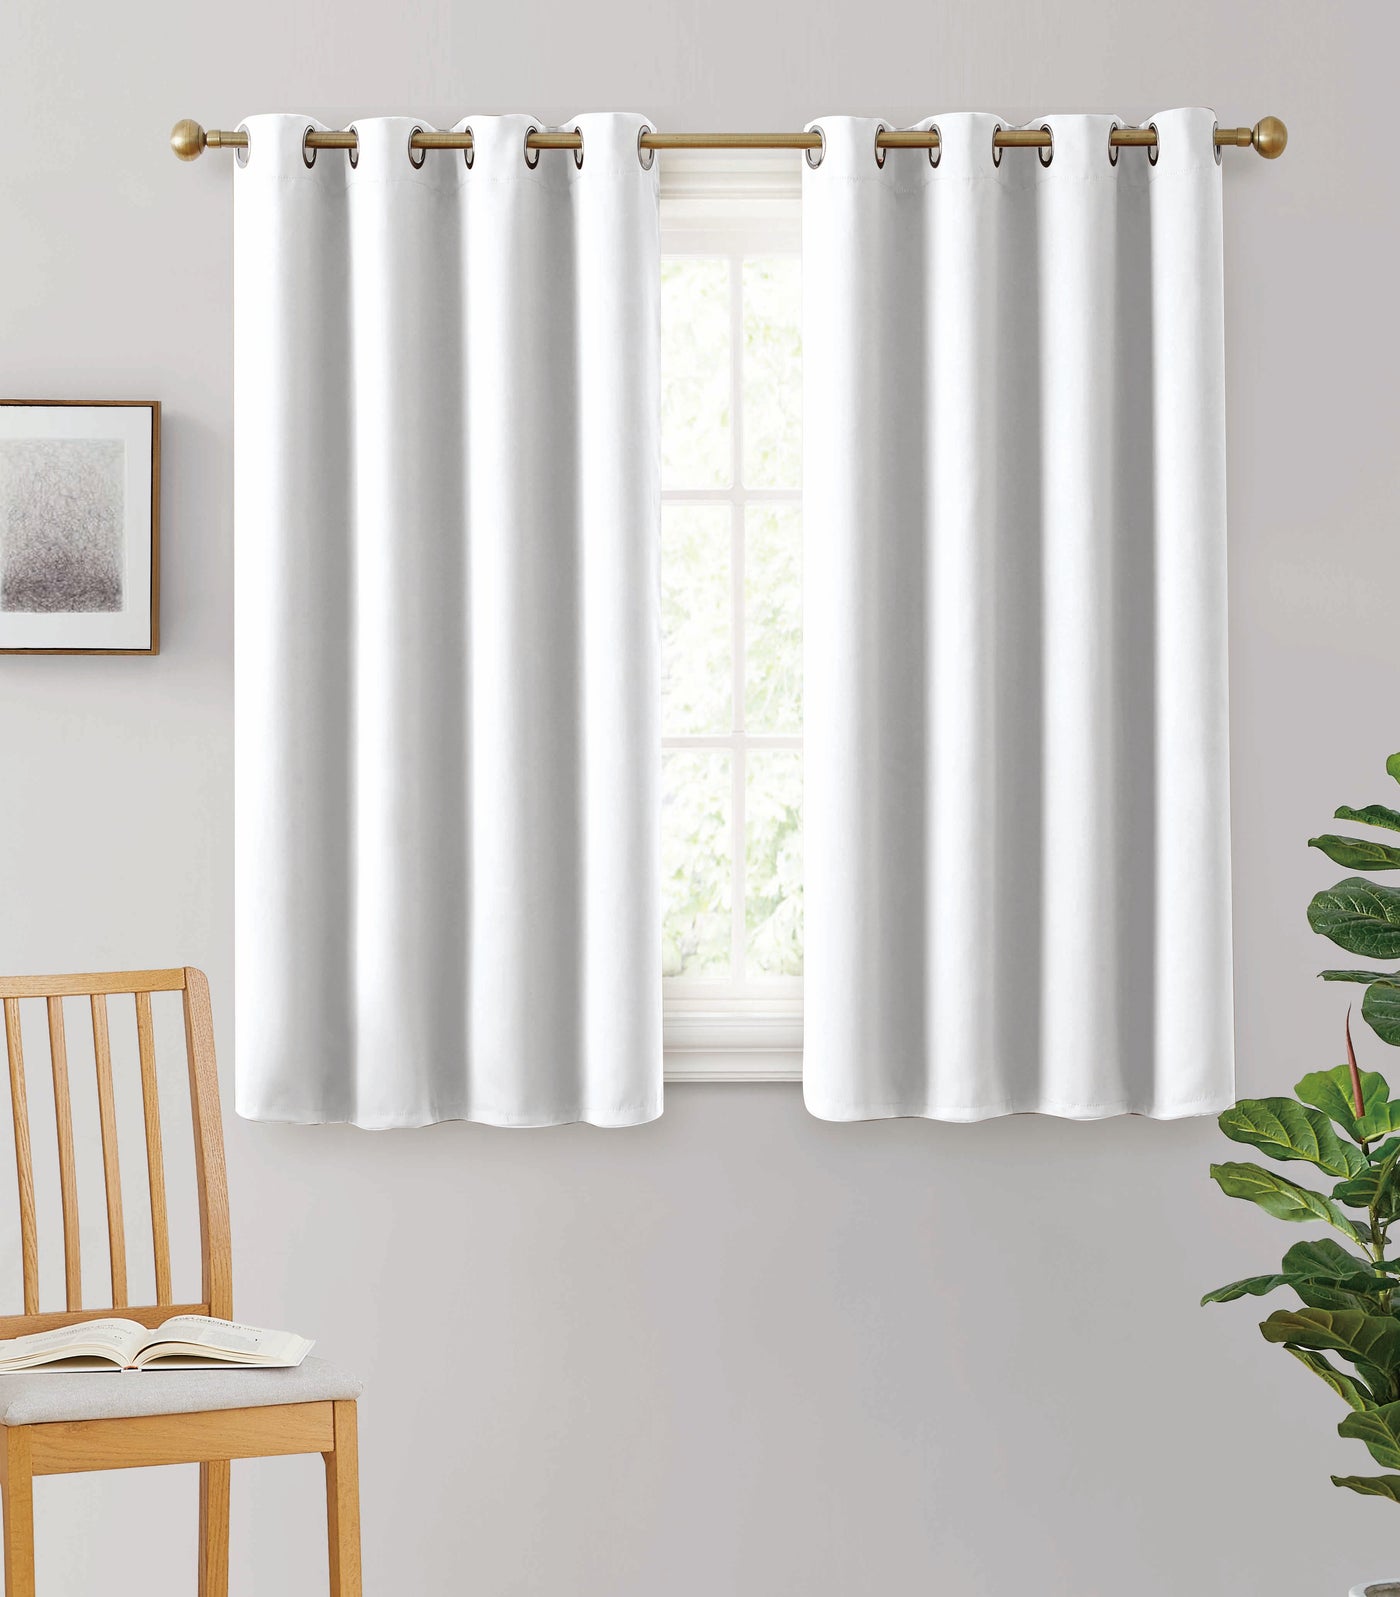 2pc Solid Grommet Thermal Insulated Window Curtain Panels Room Darkening Blackout 45"